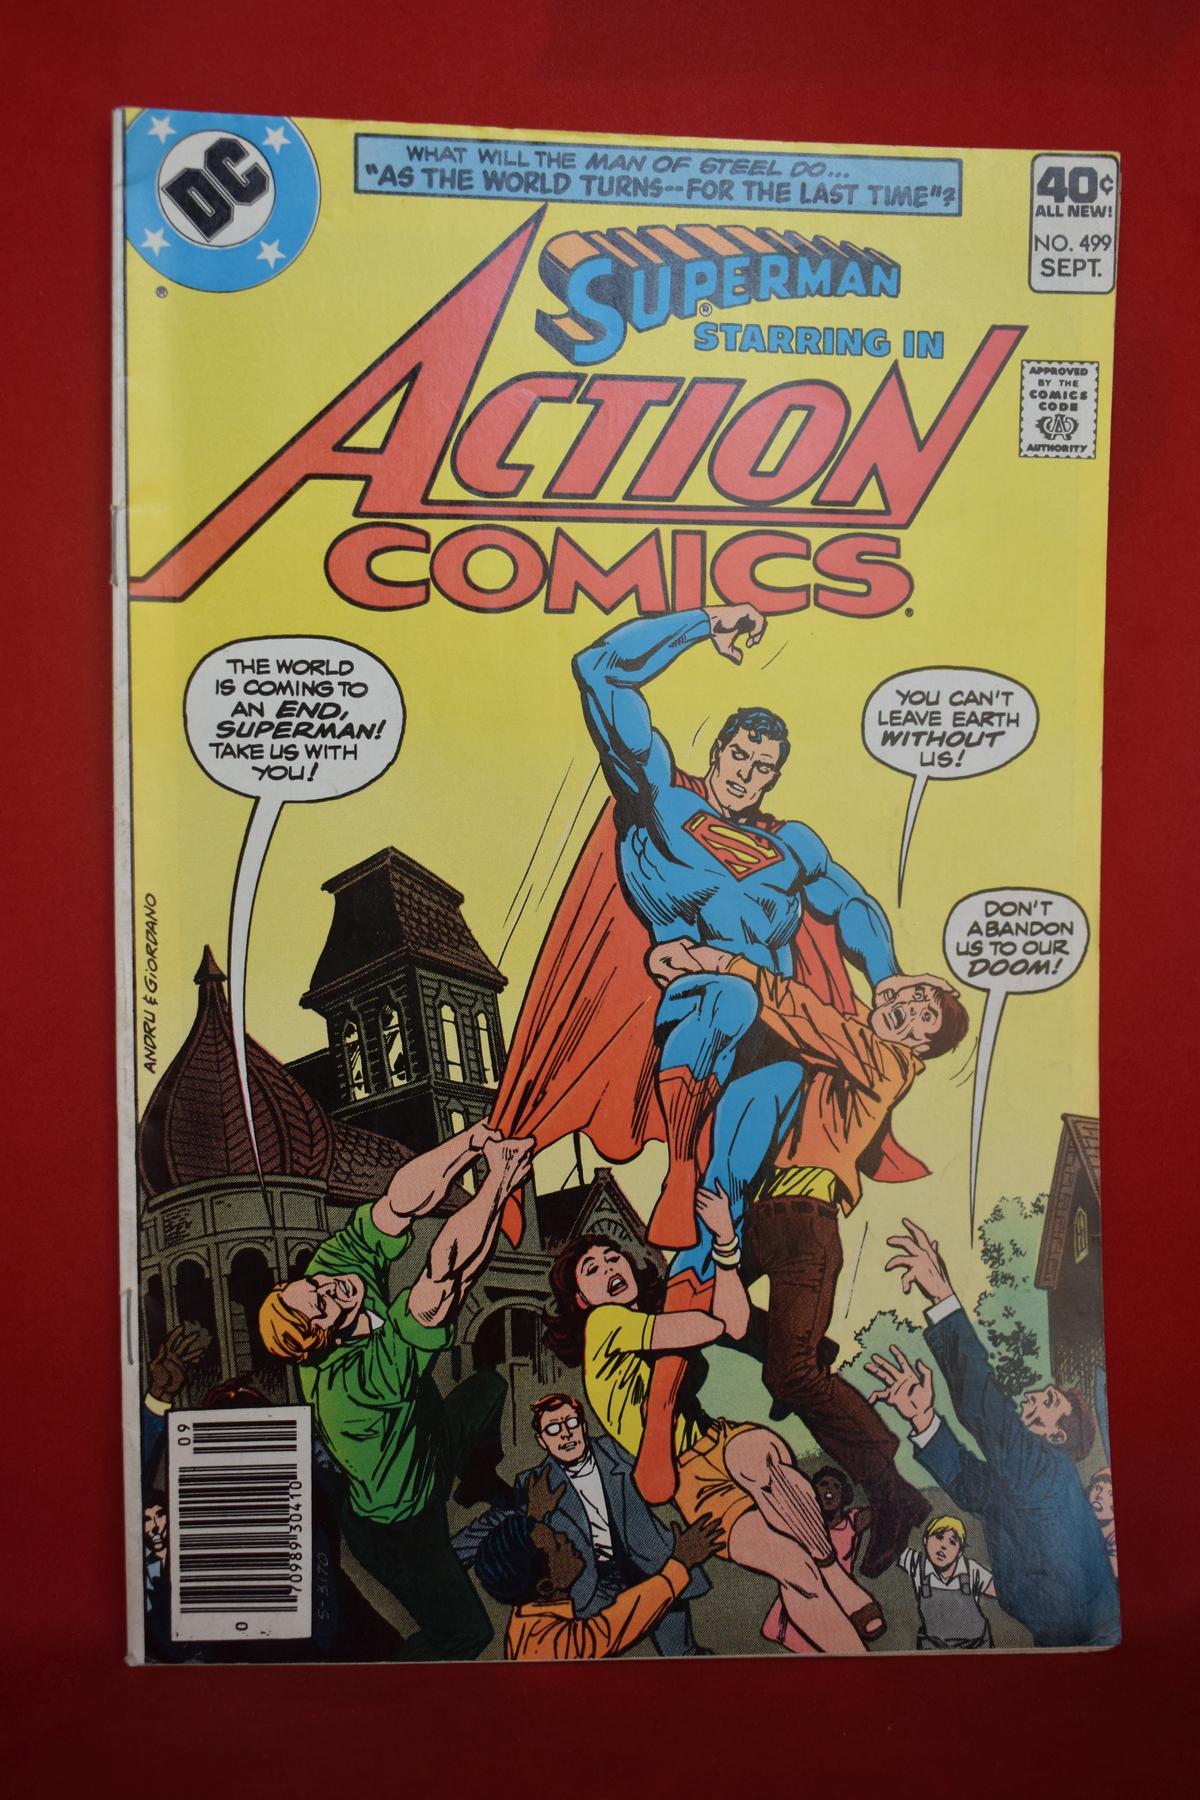 ACTION COMICS #499 | AS THE WORLD TURNS FOR THE LAST TIME! | ROSS ANDRU - 1979